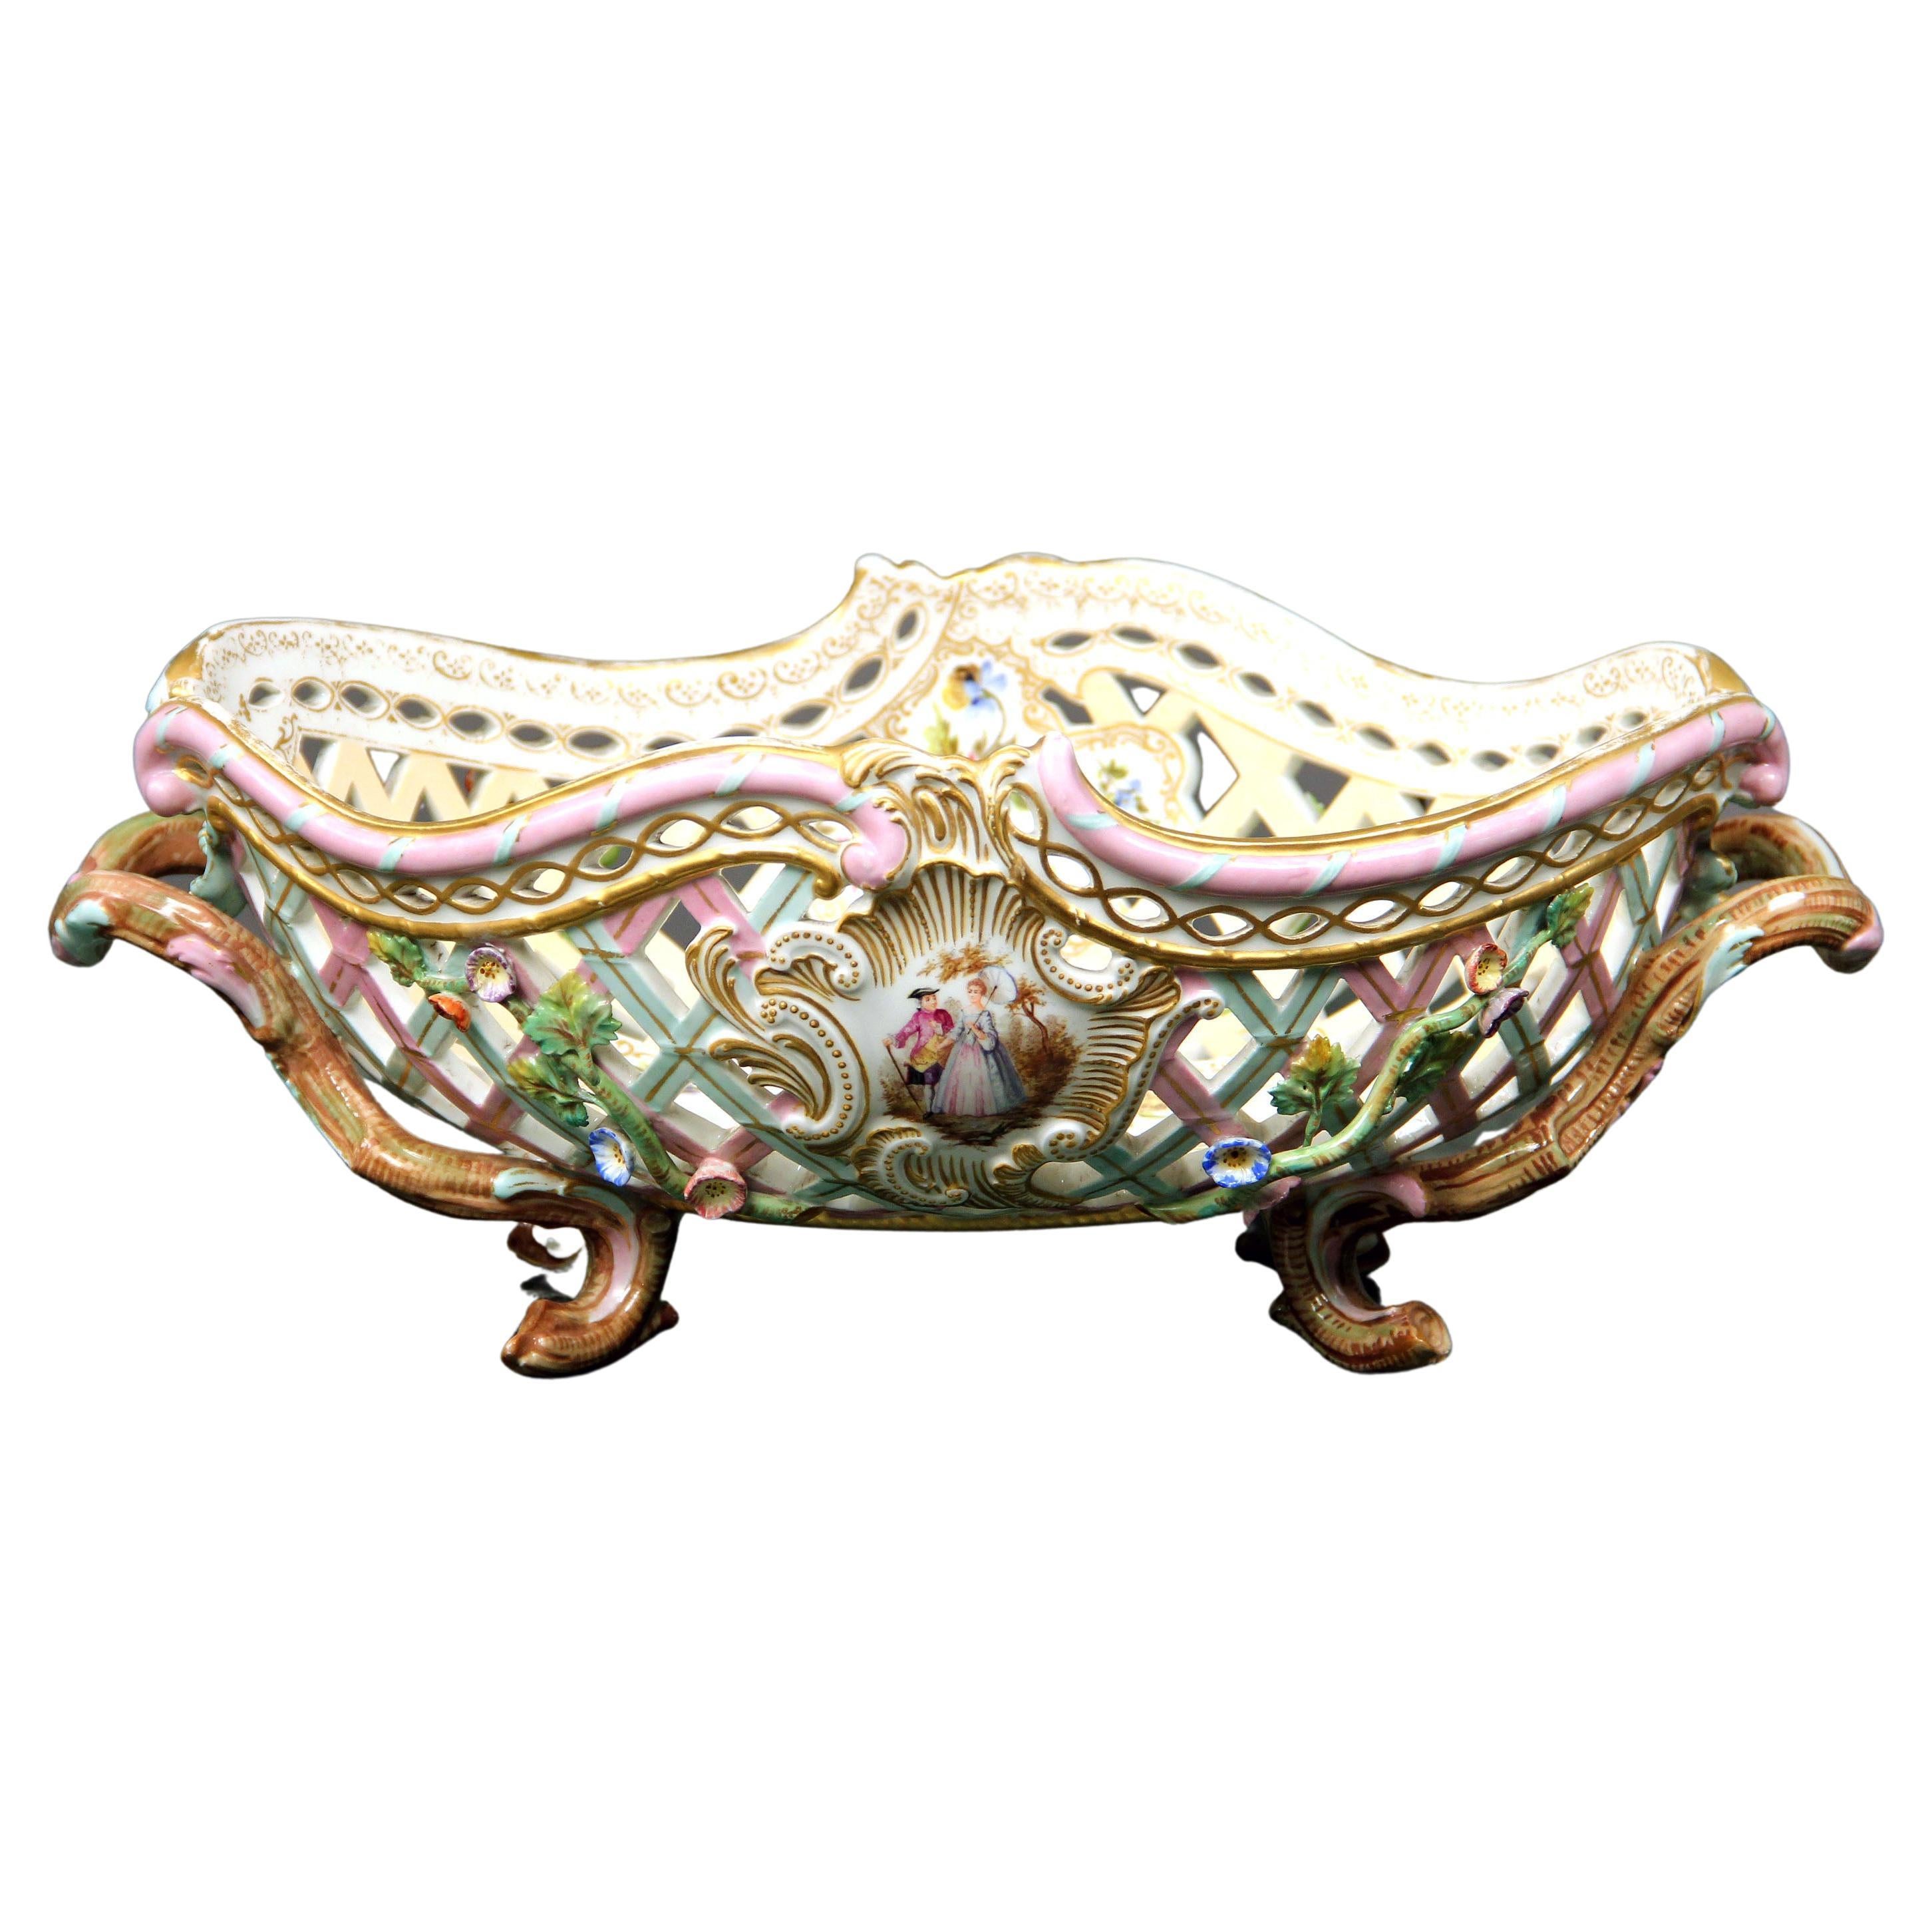 Late 19th/Early 20th Century Reticulated German K.P.M. Porcelain Centerpiece